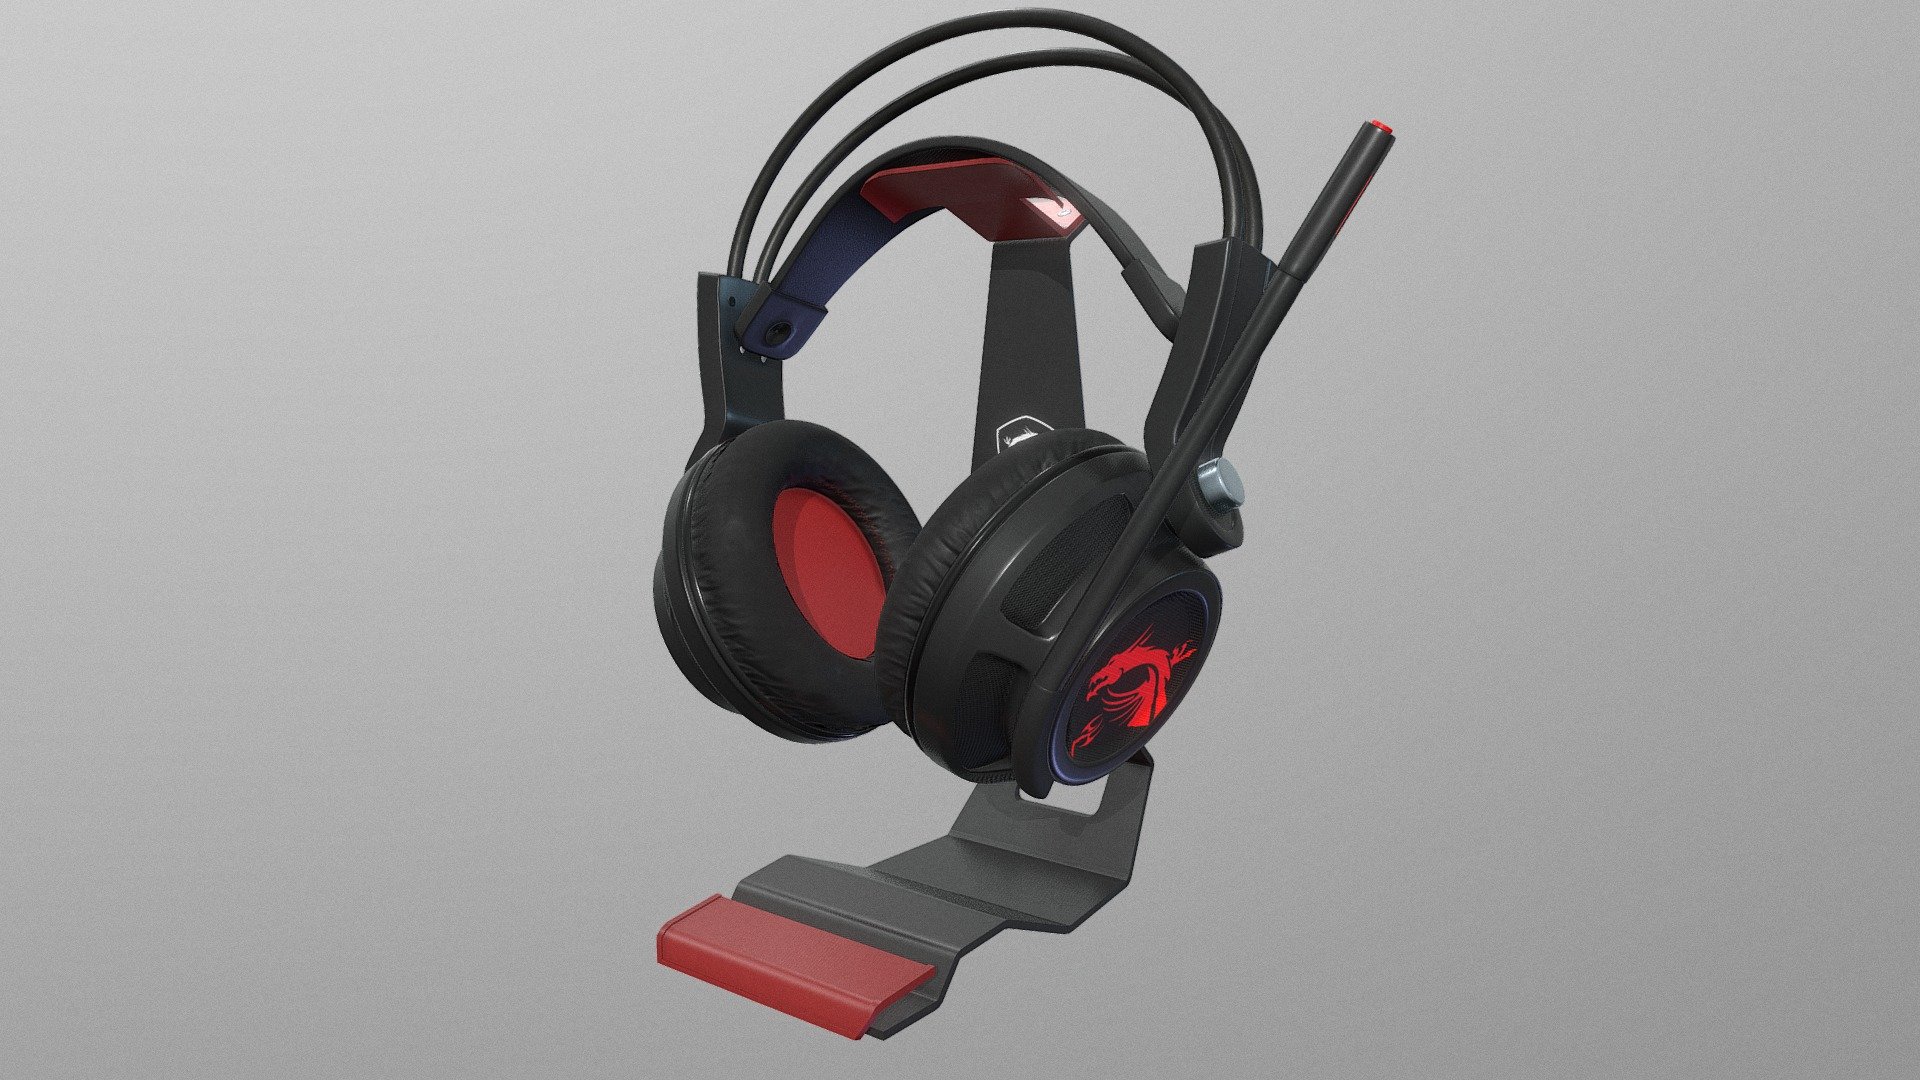 MSI Headphone 

contace us for more details 
orbsmagic@gmail.com - MSI headphone Created by Magicalorbs team - 3D model by Magicalorbs (@orbsmagic) 3d model